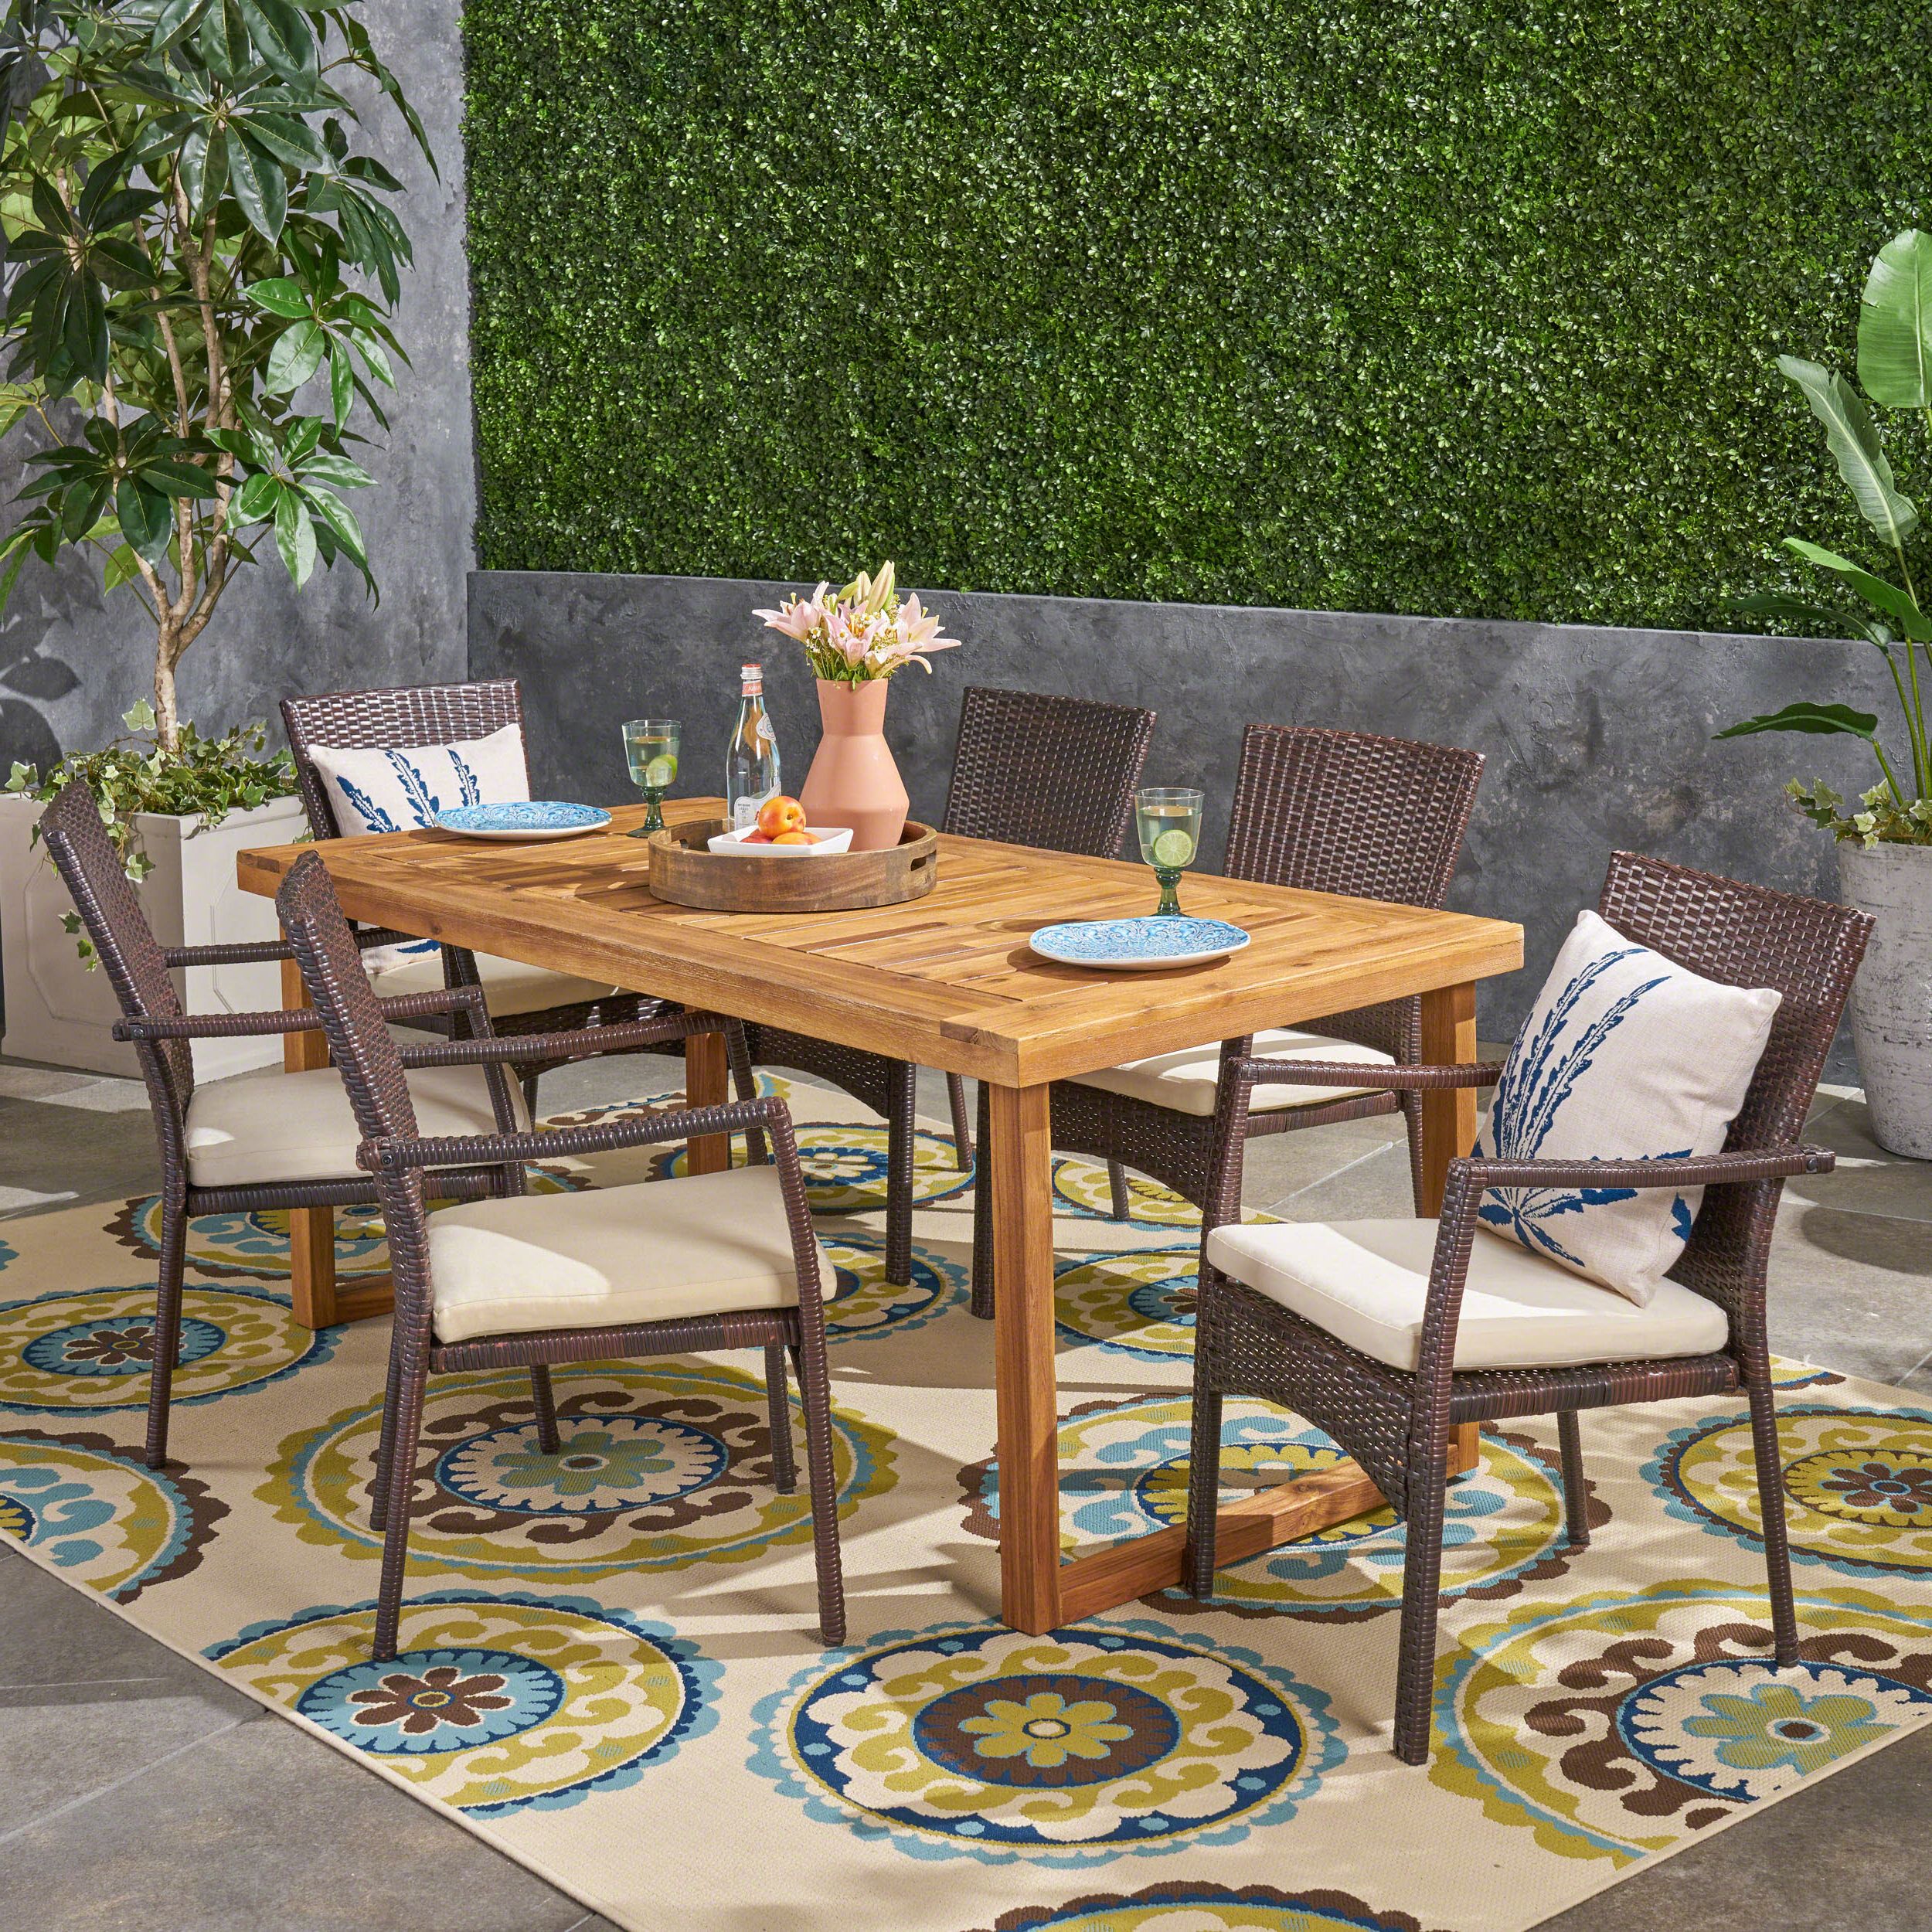 Preferred Natural Woven Outdoor Chairs Sets Regarding Lily Outdoor 7 Piece Acacia Wood Dining Set With Wicker Chairs And (View 1 of 15)